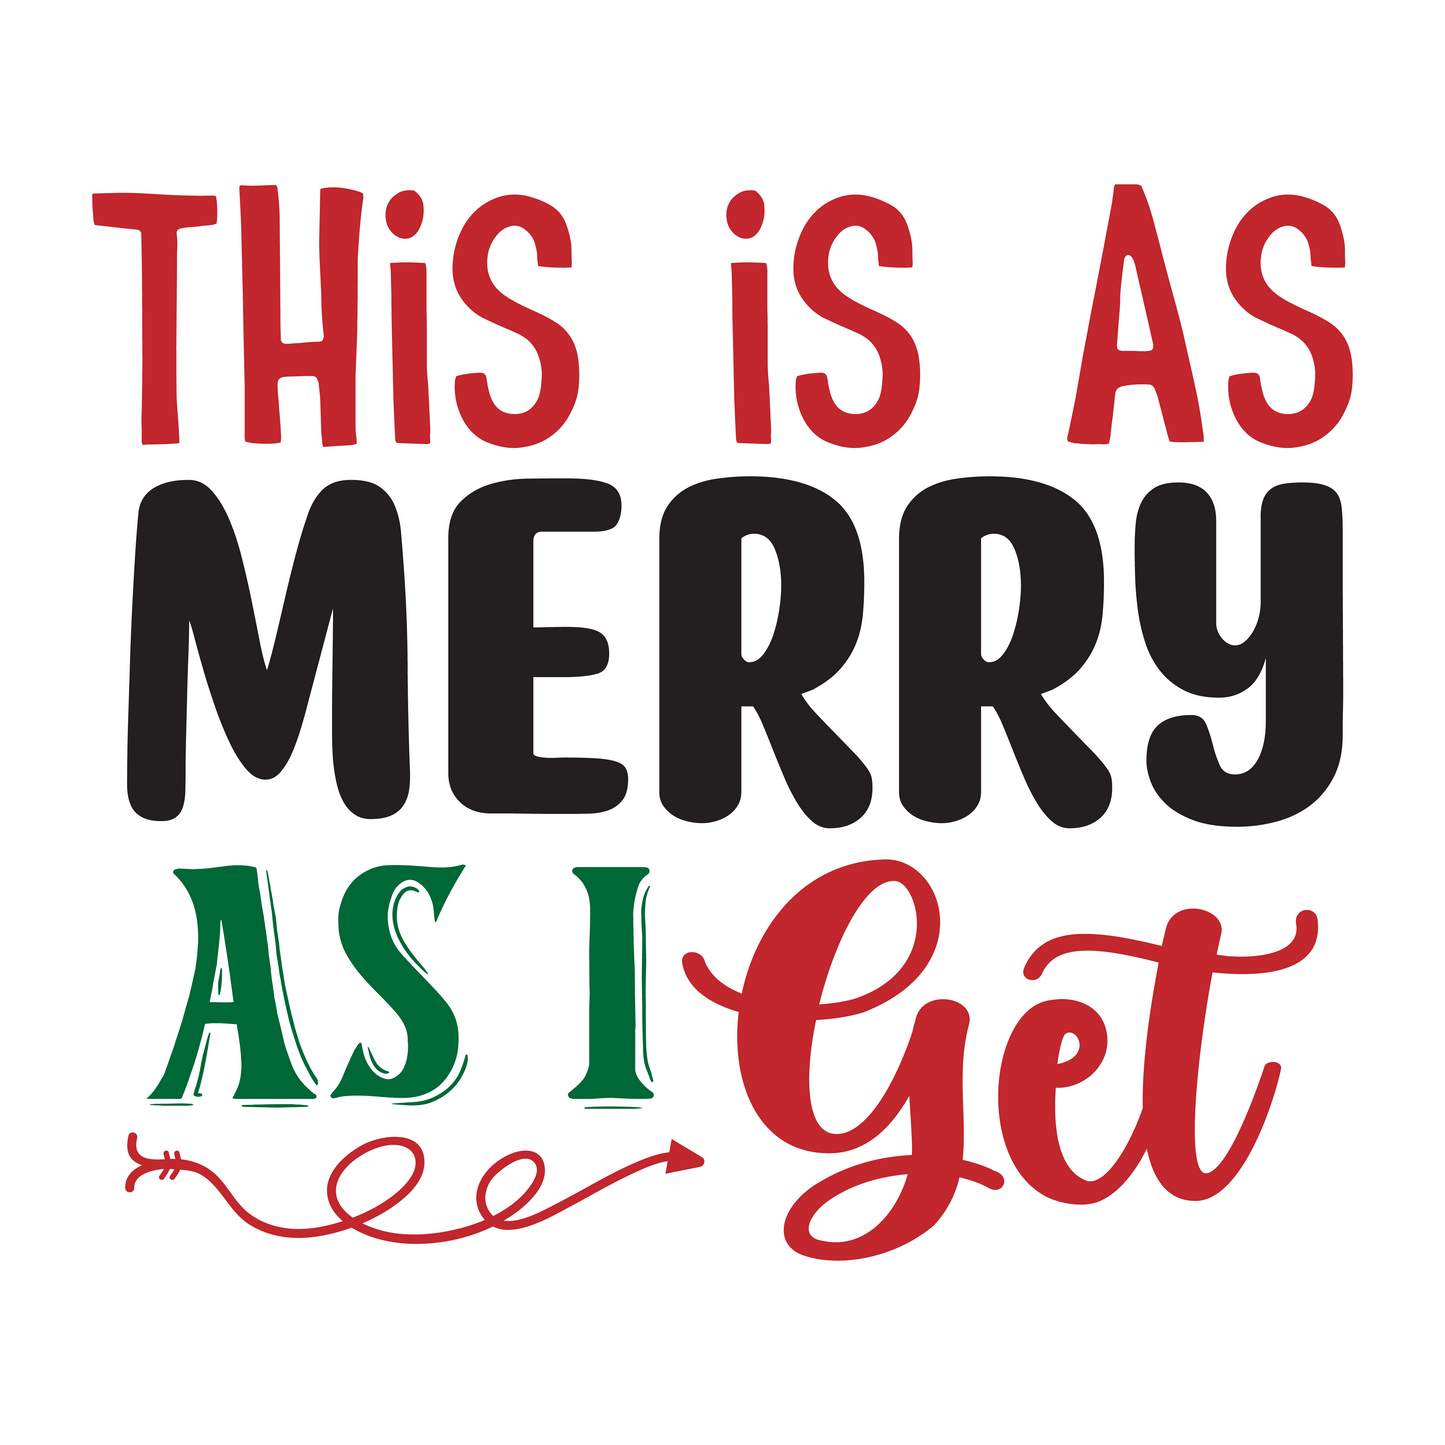 Stickers - This Is As Merry As I Get Sticker, Christmas Stickers